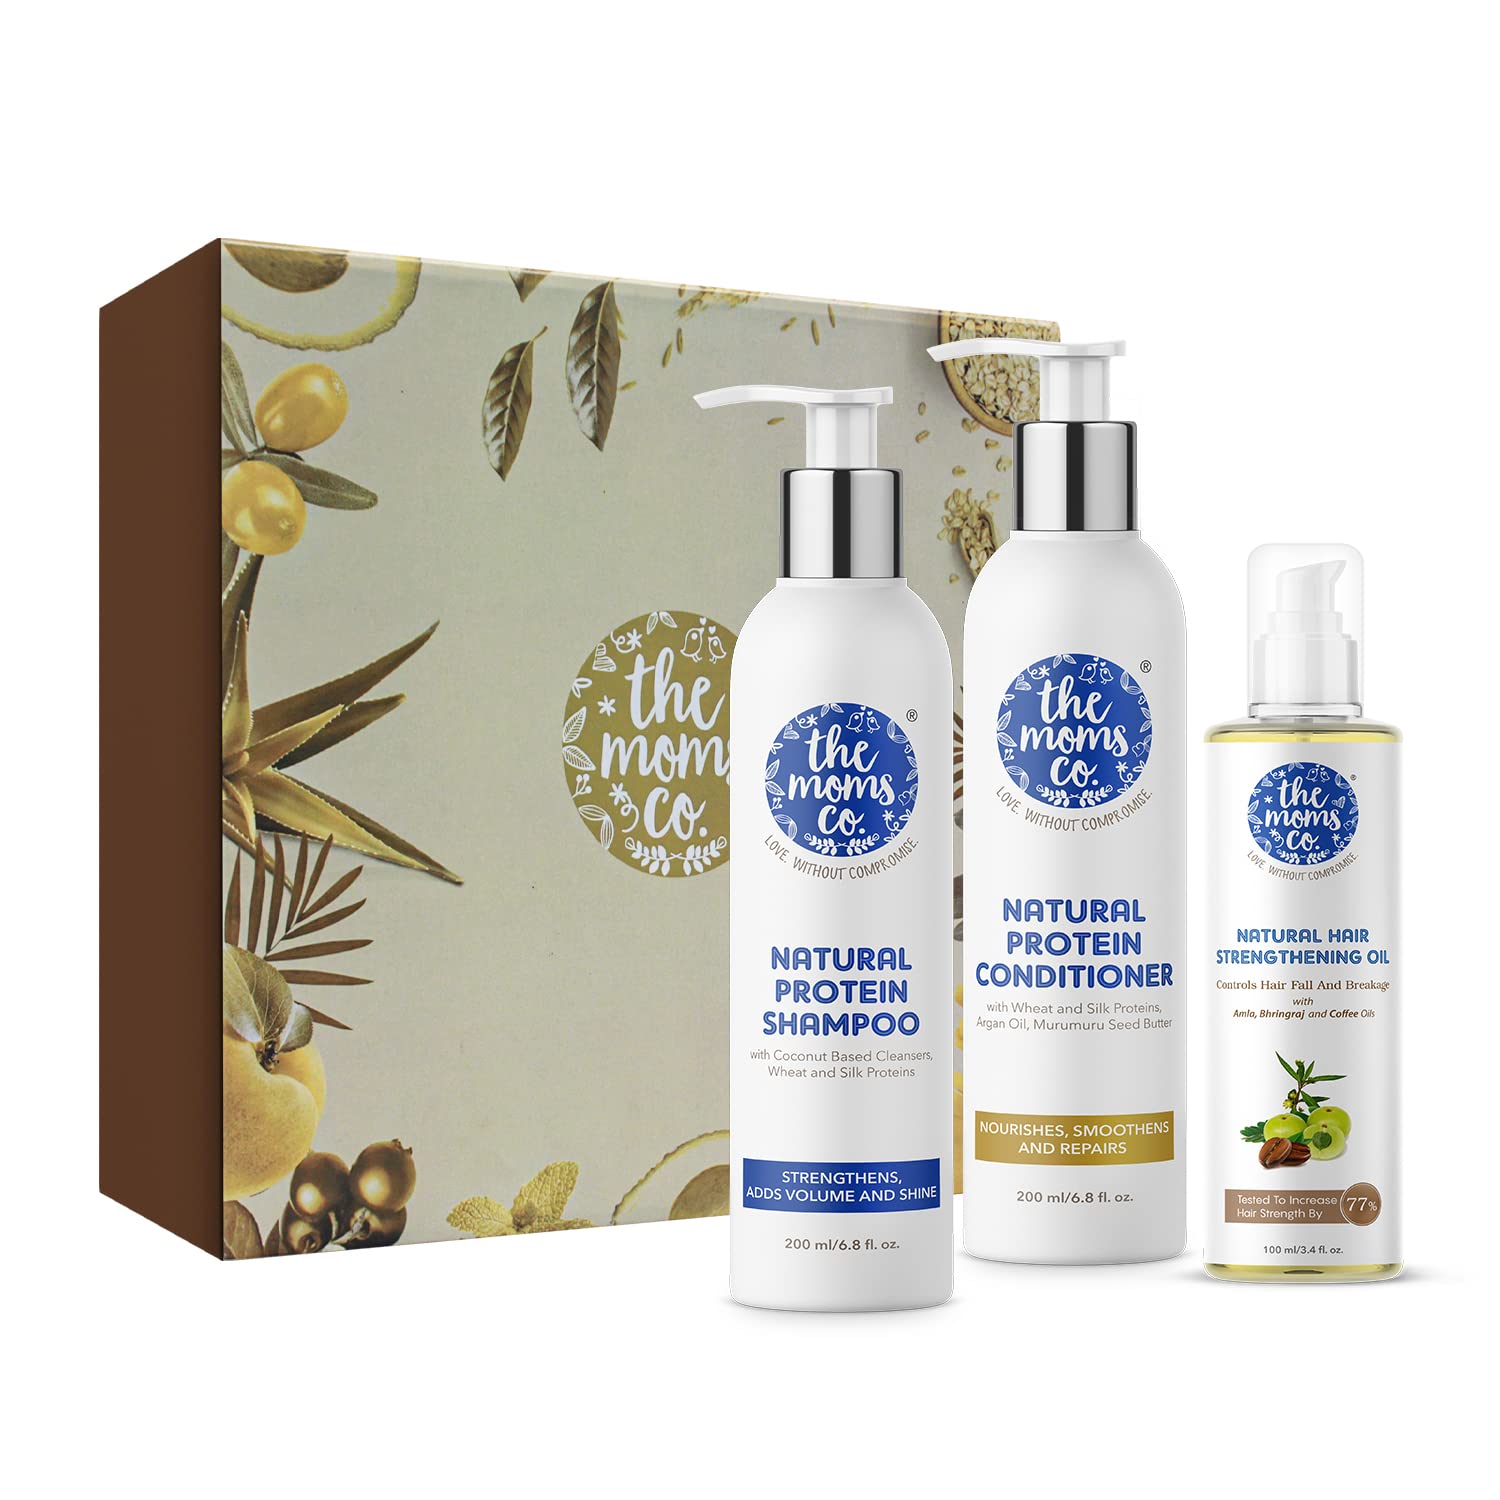 The Moms Co Anti-Hair fall complete care kit - For Healthy & Strong Hair with Amla, Bhringraj & Coffee Oils